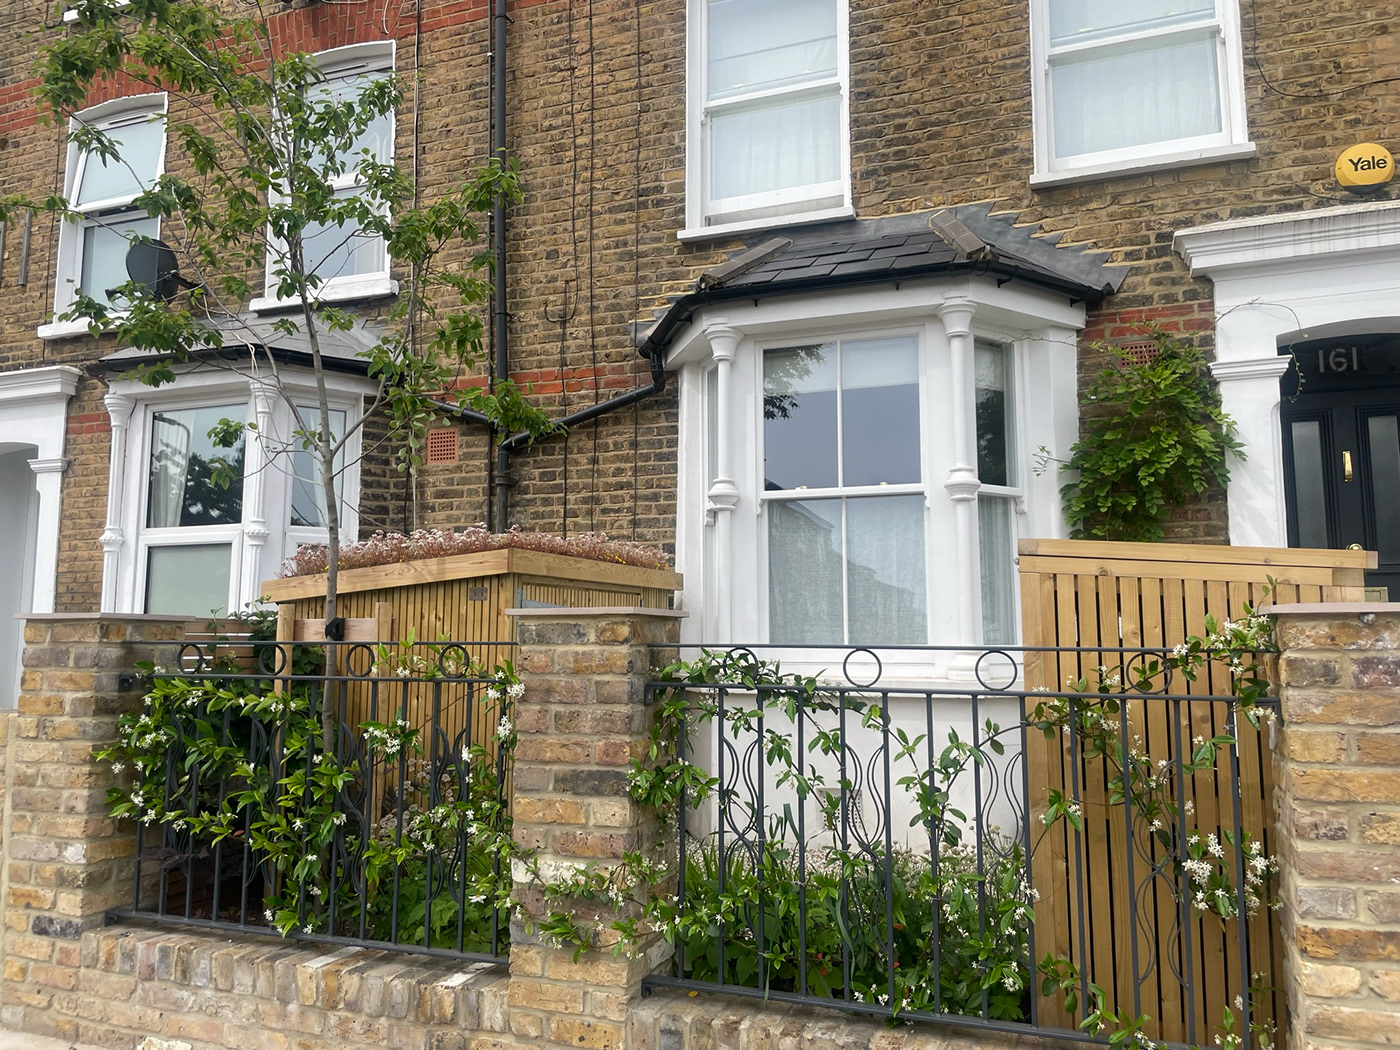 The open design of this front garden provides aesthetic views from both the pavement and house